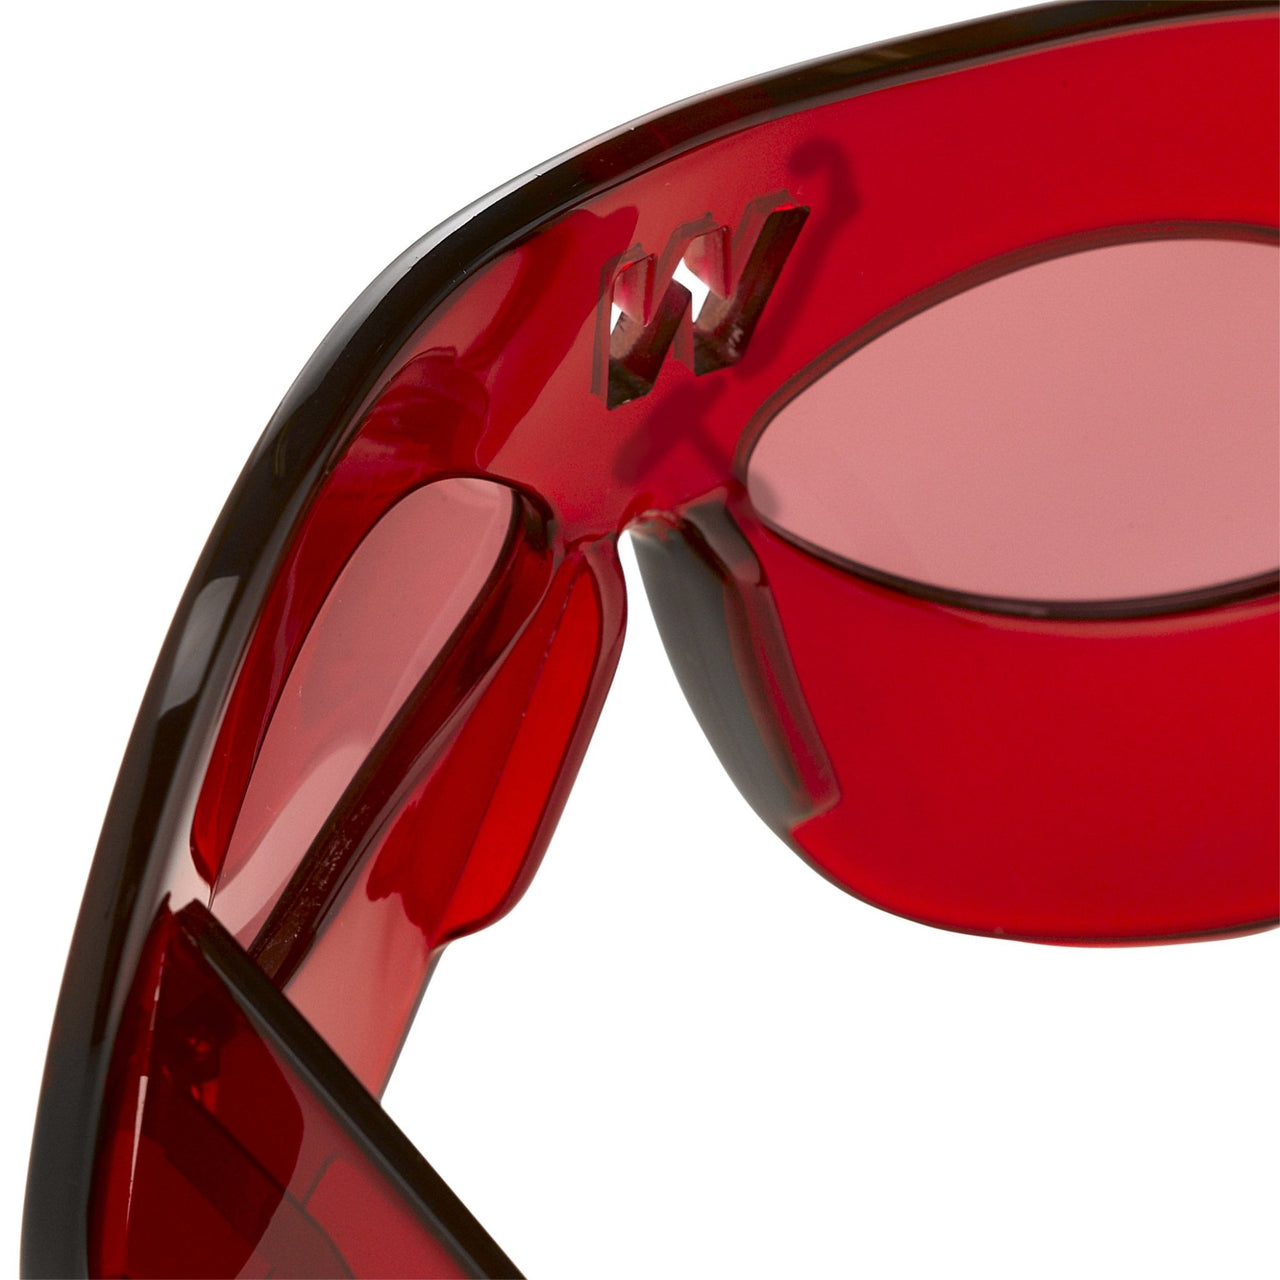 Walter Van Beirendonck Sunglasses Special Frame Red and Red Lenses - WVB3C6SUN - Watches & Crystals